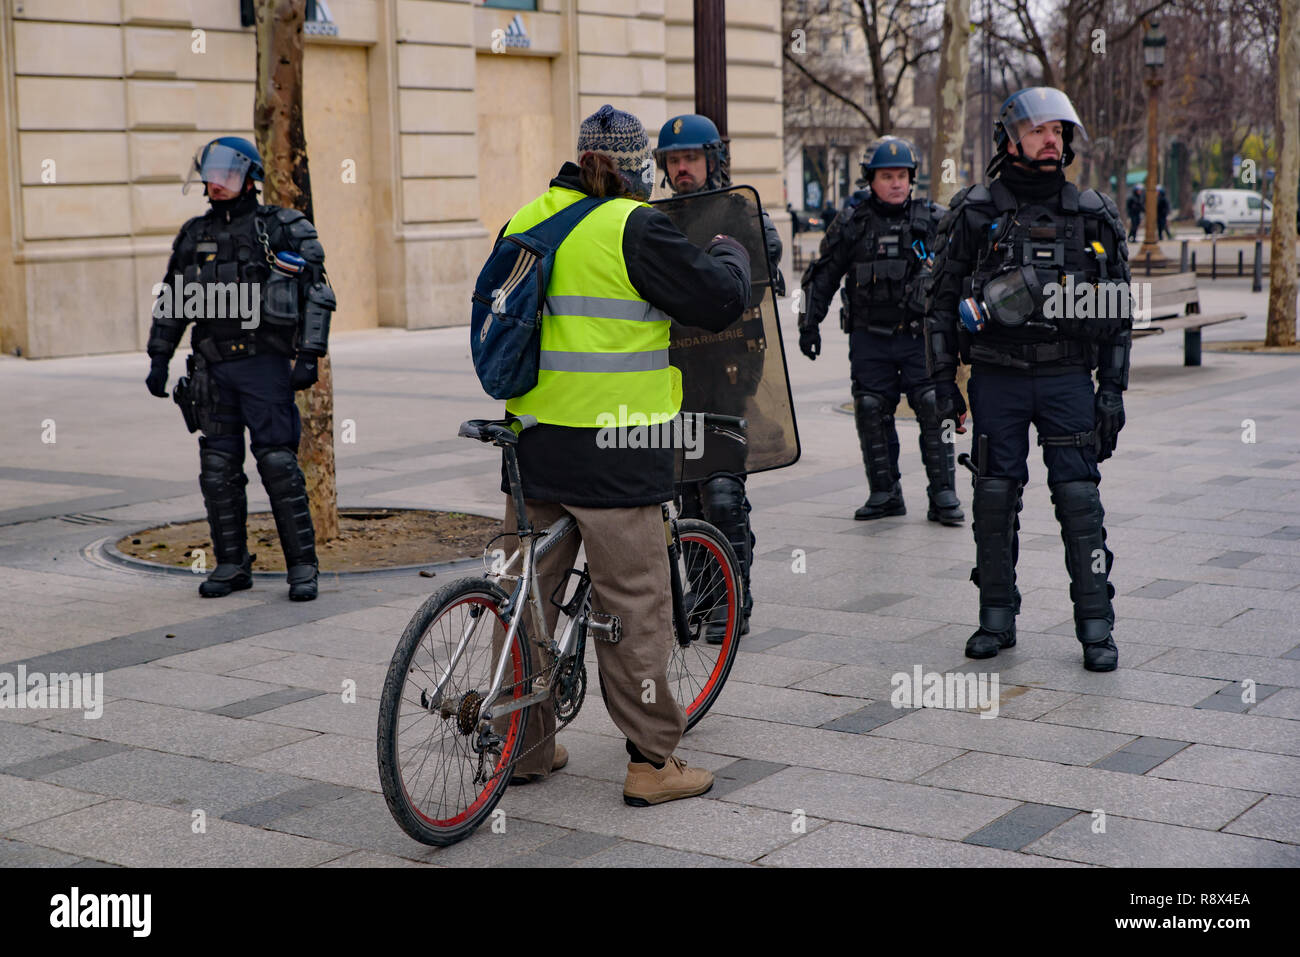 Riot police and Yellow Vests demonstration (Gilets Jaunes) protesters against government and French President Macron at Champs-Élysées, Paris, France Stock Photo